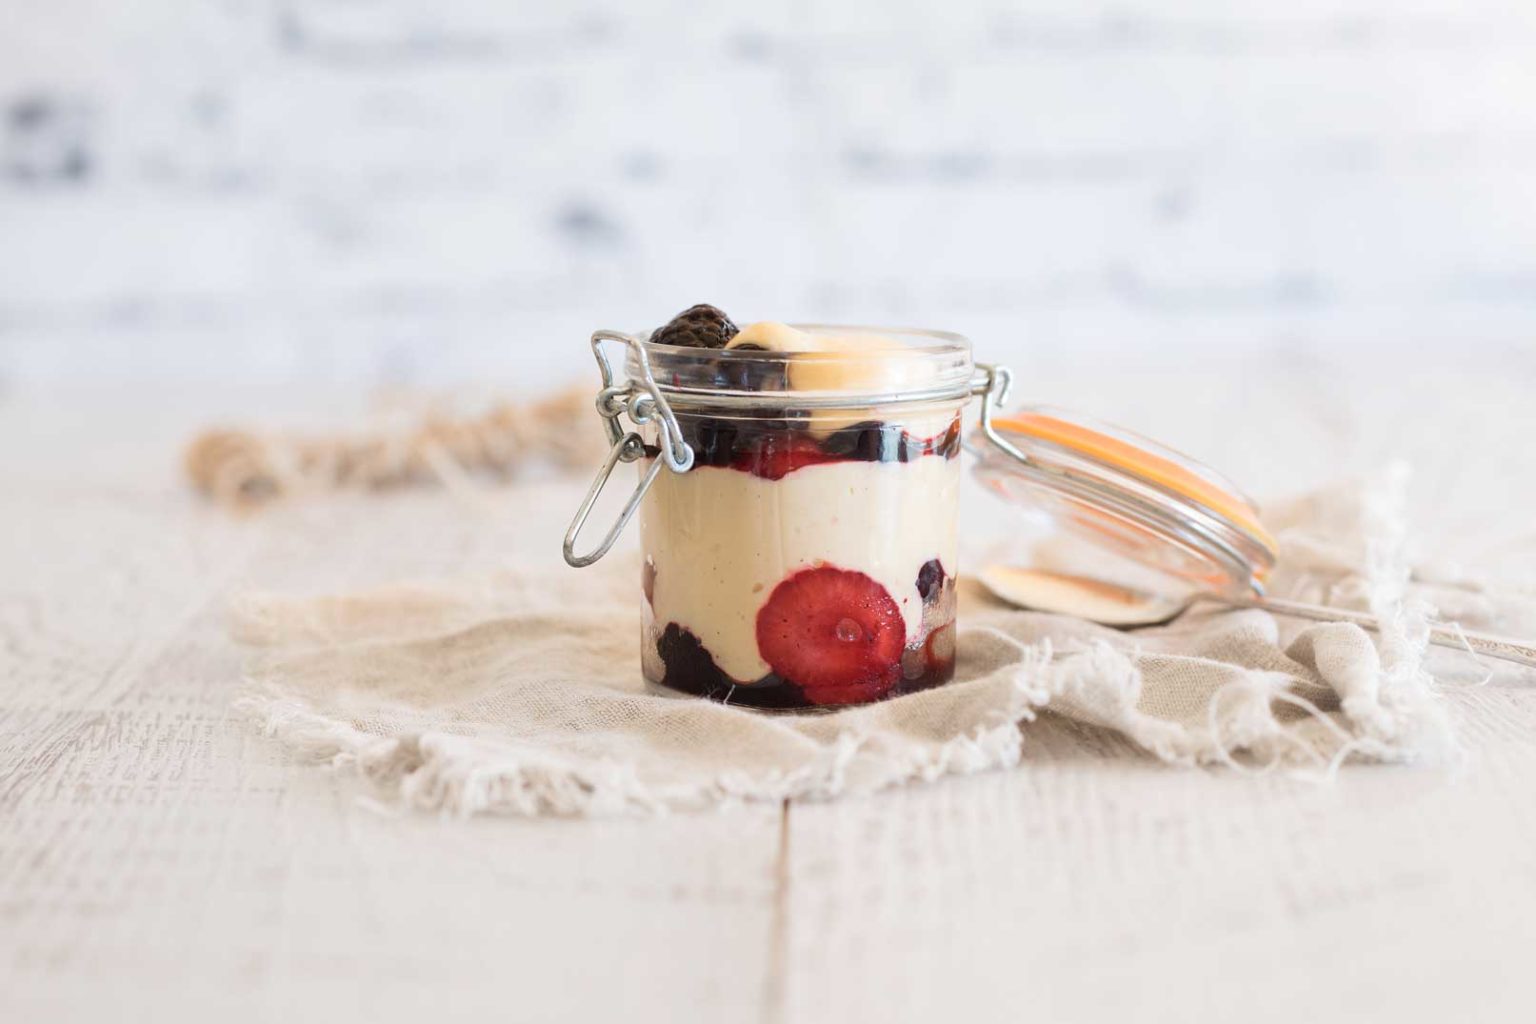 Custard pudding served in a glass jar with the lid open sitting on a rustic cloth napkin.